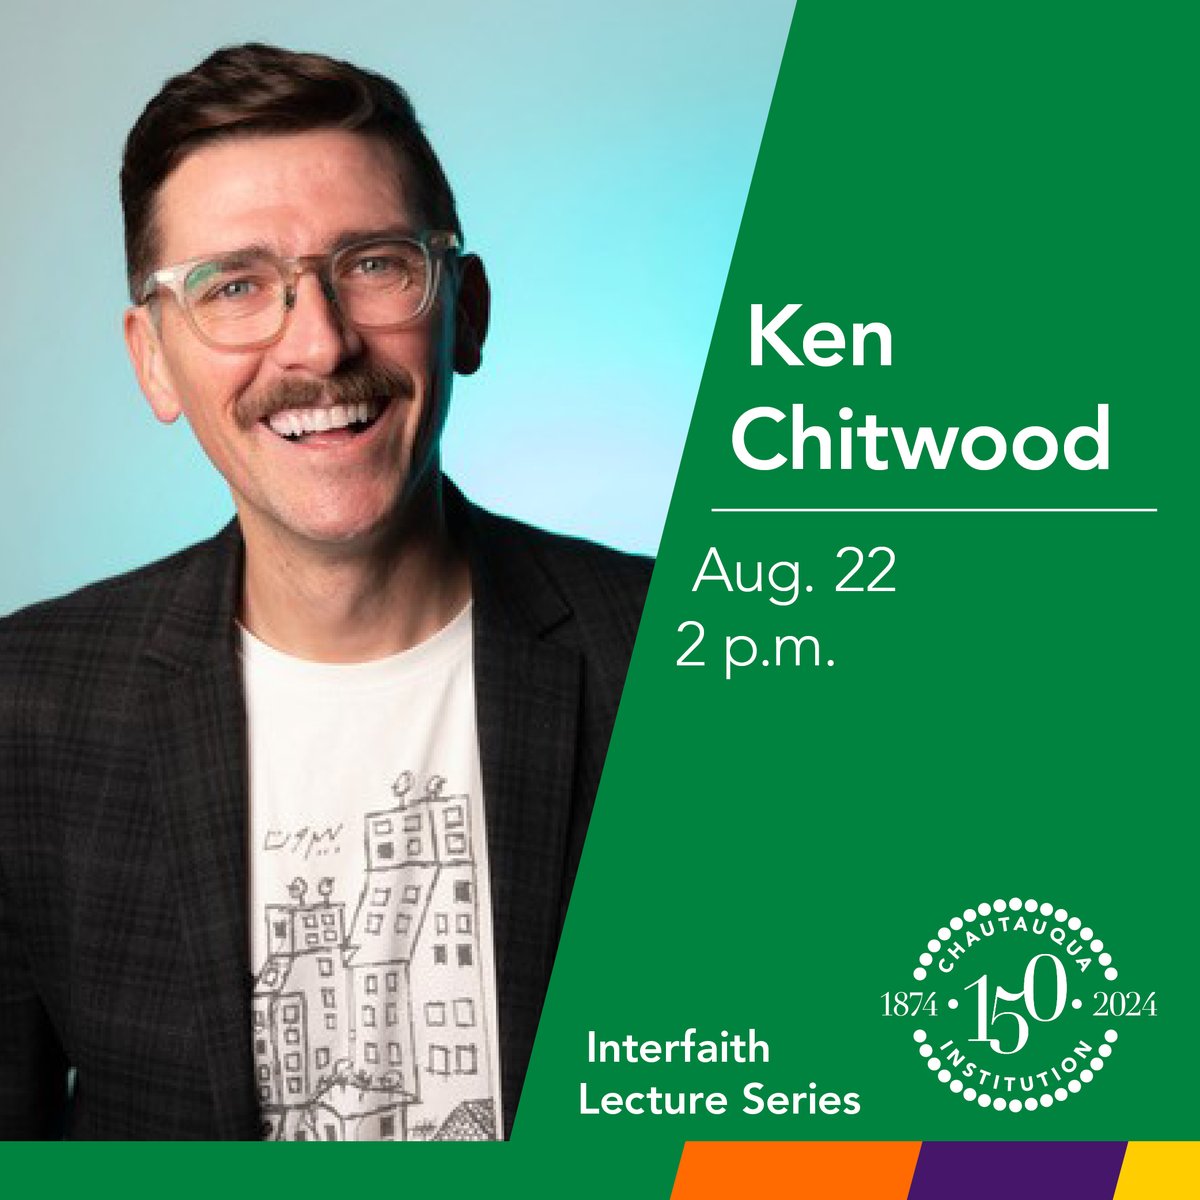 🚨#CHQ2024 ANNOUNCEMENT🚨 Chautauqua welcomes religion scholar, journalist, and public theologian Ken Chitwood into our 2024 Interfaith Lecture Series as we celebrate 150 years this summer. #CHQ2024 #chq150 #CLSWeekNine